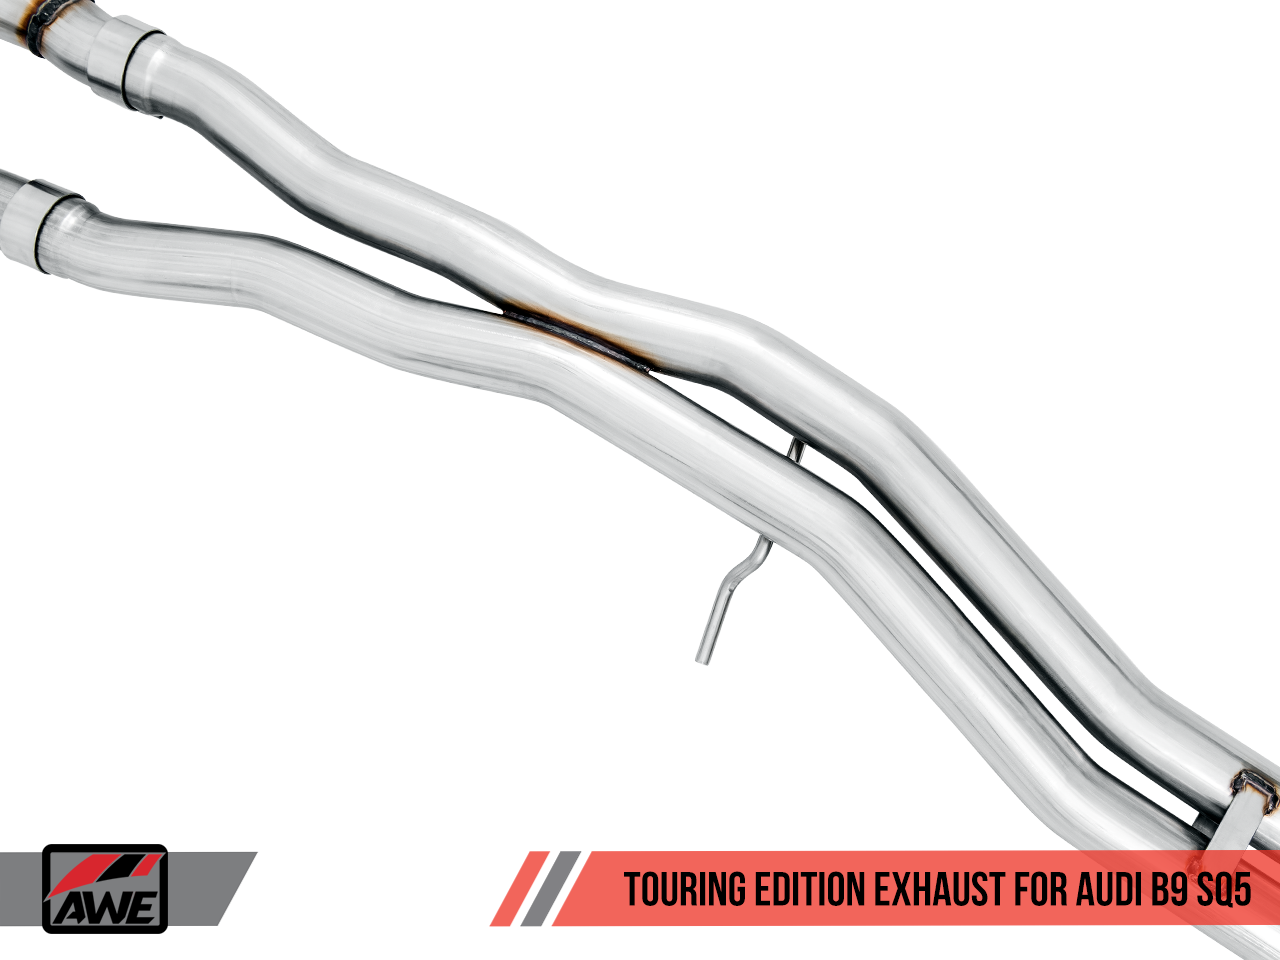 AWE Touring Edition Exhaust for Audi B9 SQ5 - Non-Resonated - No Tips (Turn Downs) - Motorsports LA